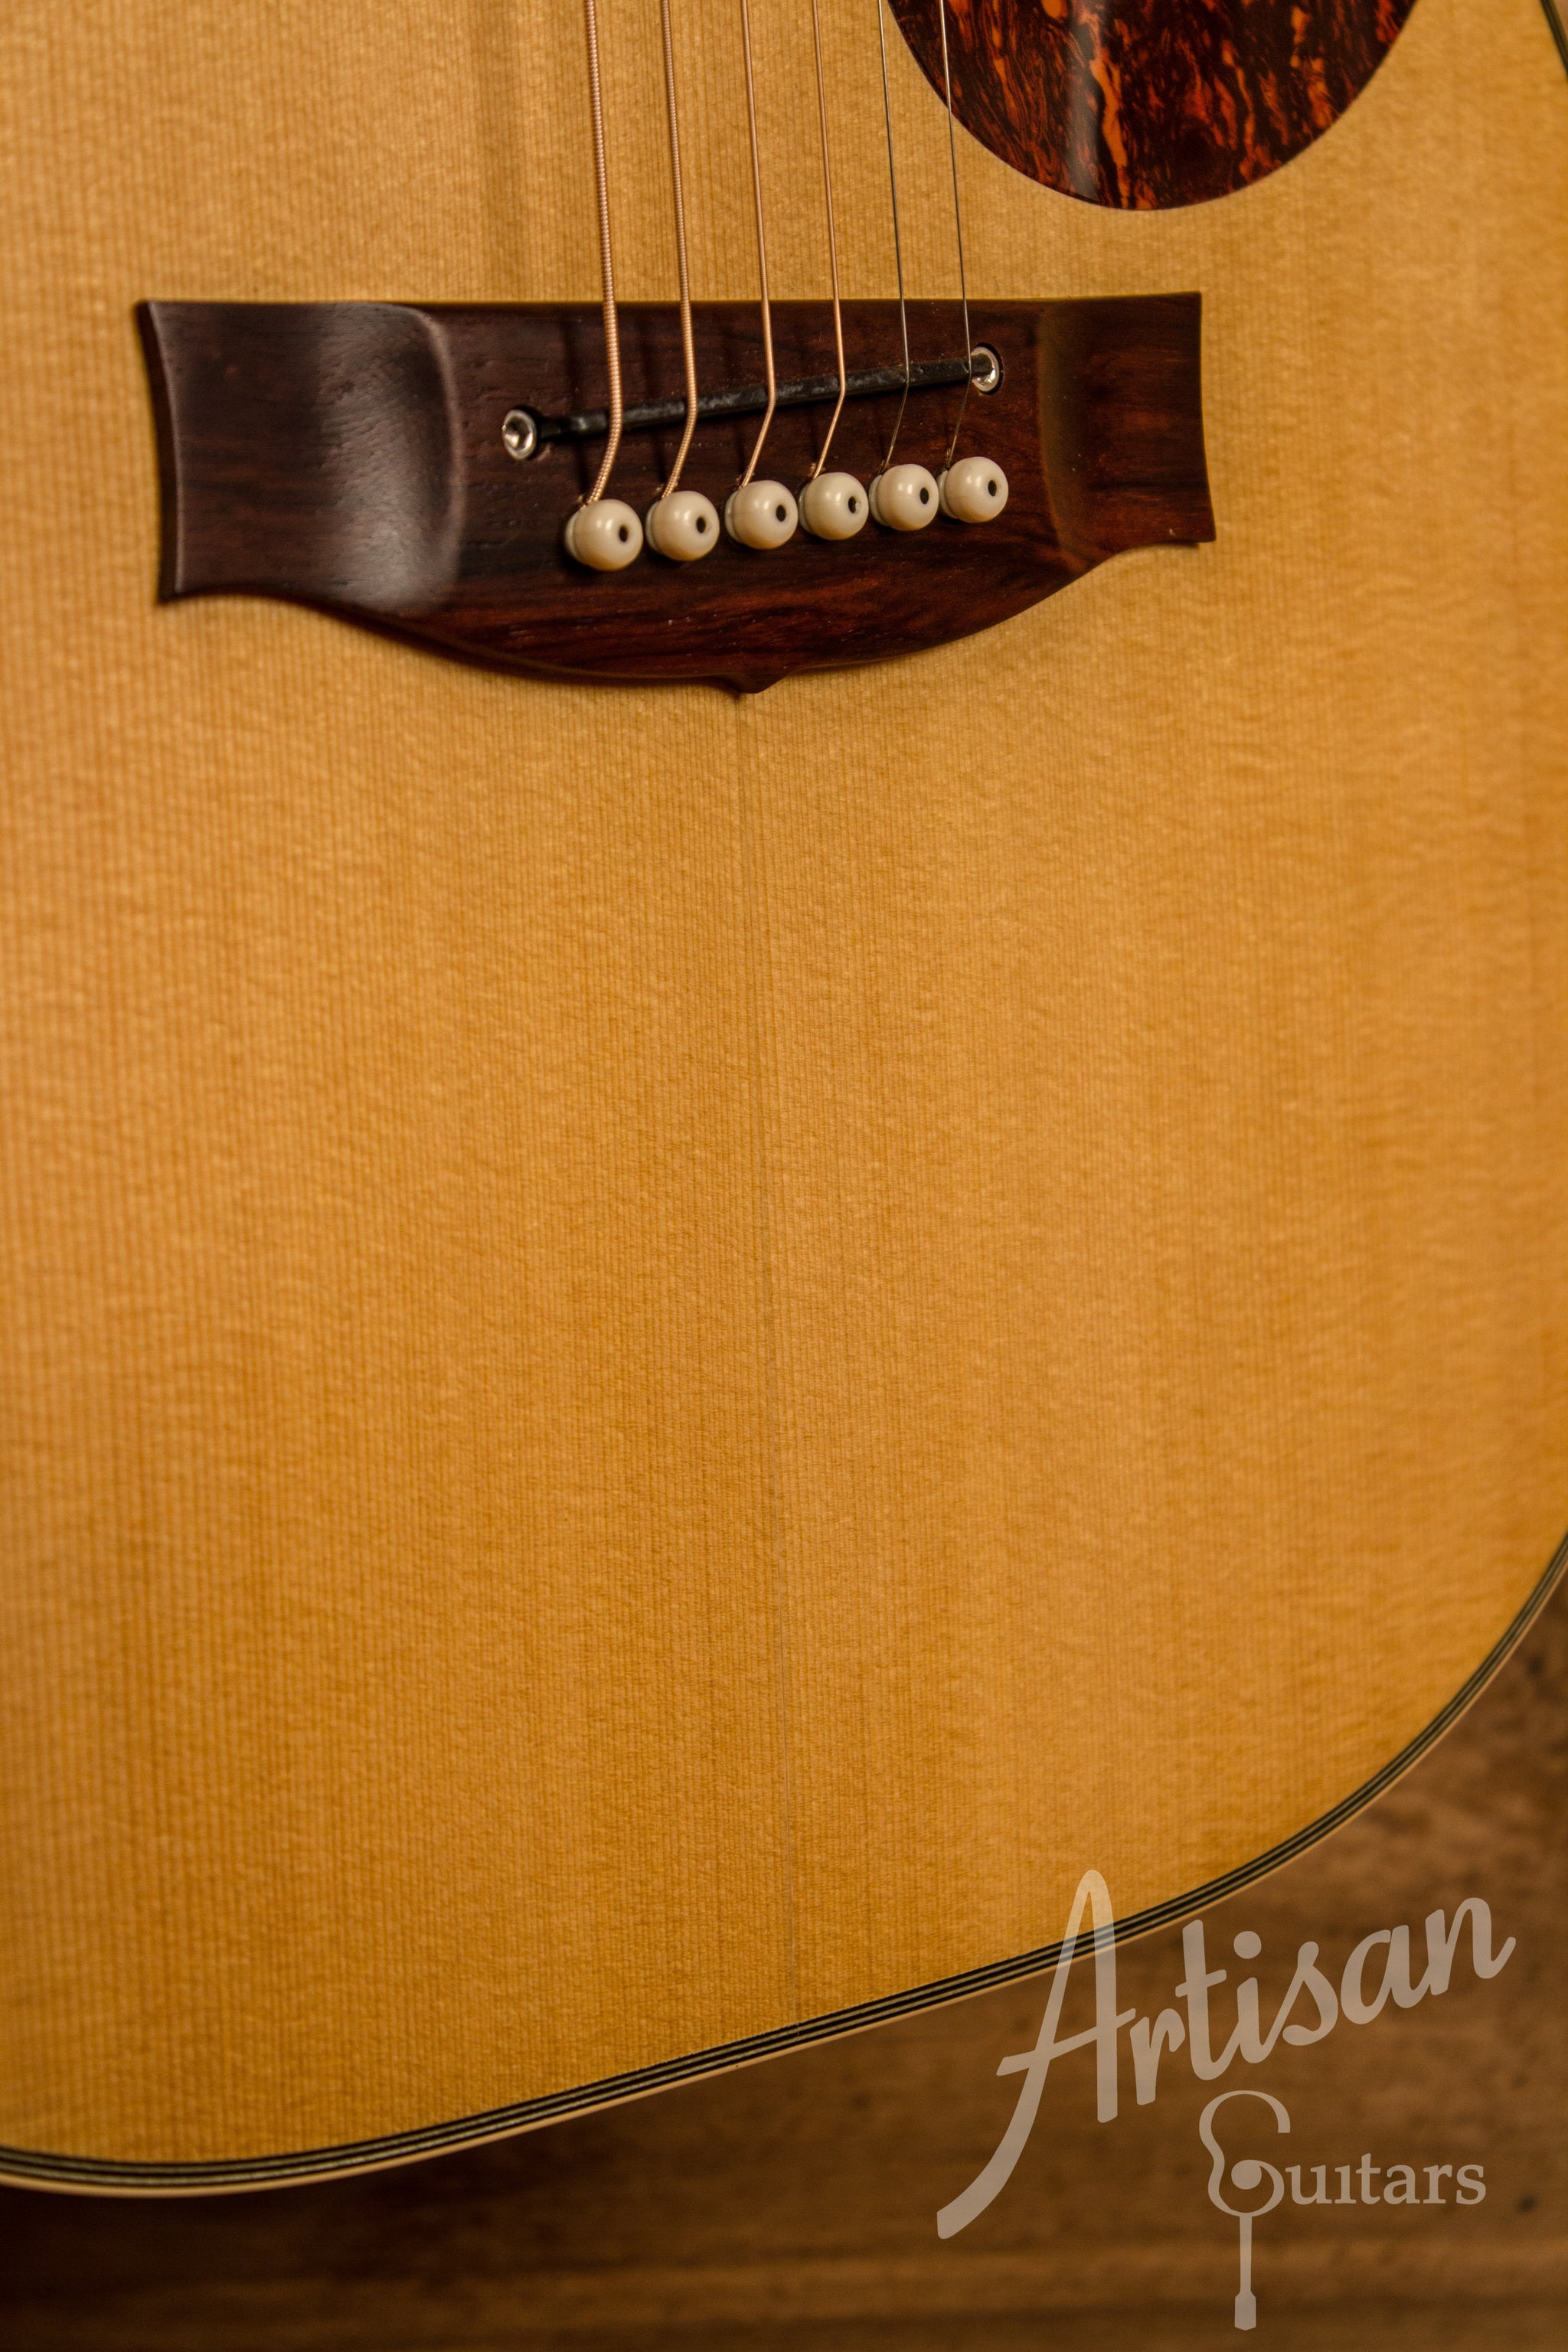 Maton EBG808TE Tommy Emmanuel Signature Sitka and Queensland Maple AP5 Mic Pre-Owned 2012 ID-11312 - Artisan Guitars